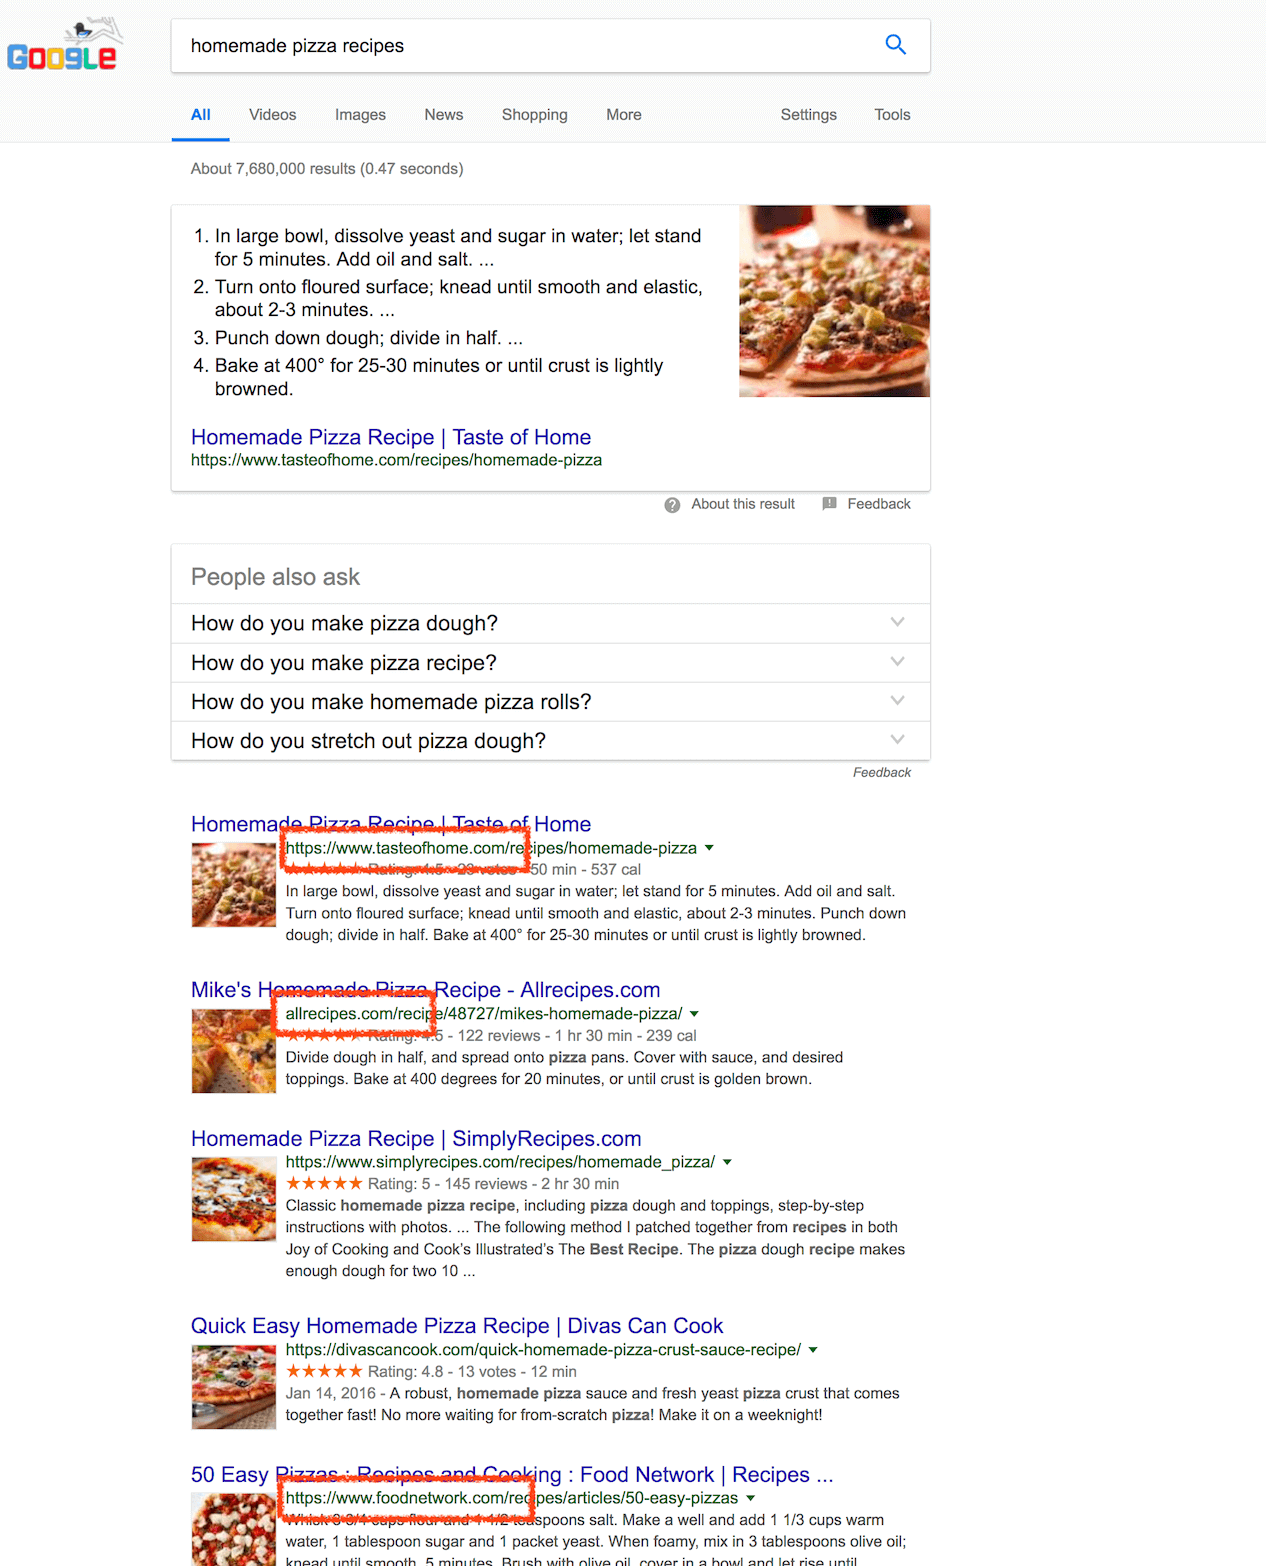 Homemade pizza search results in google